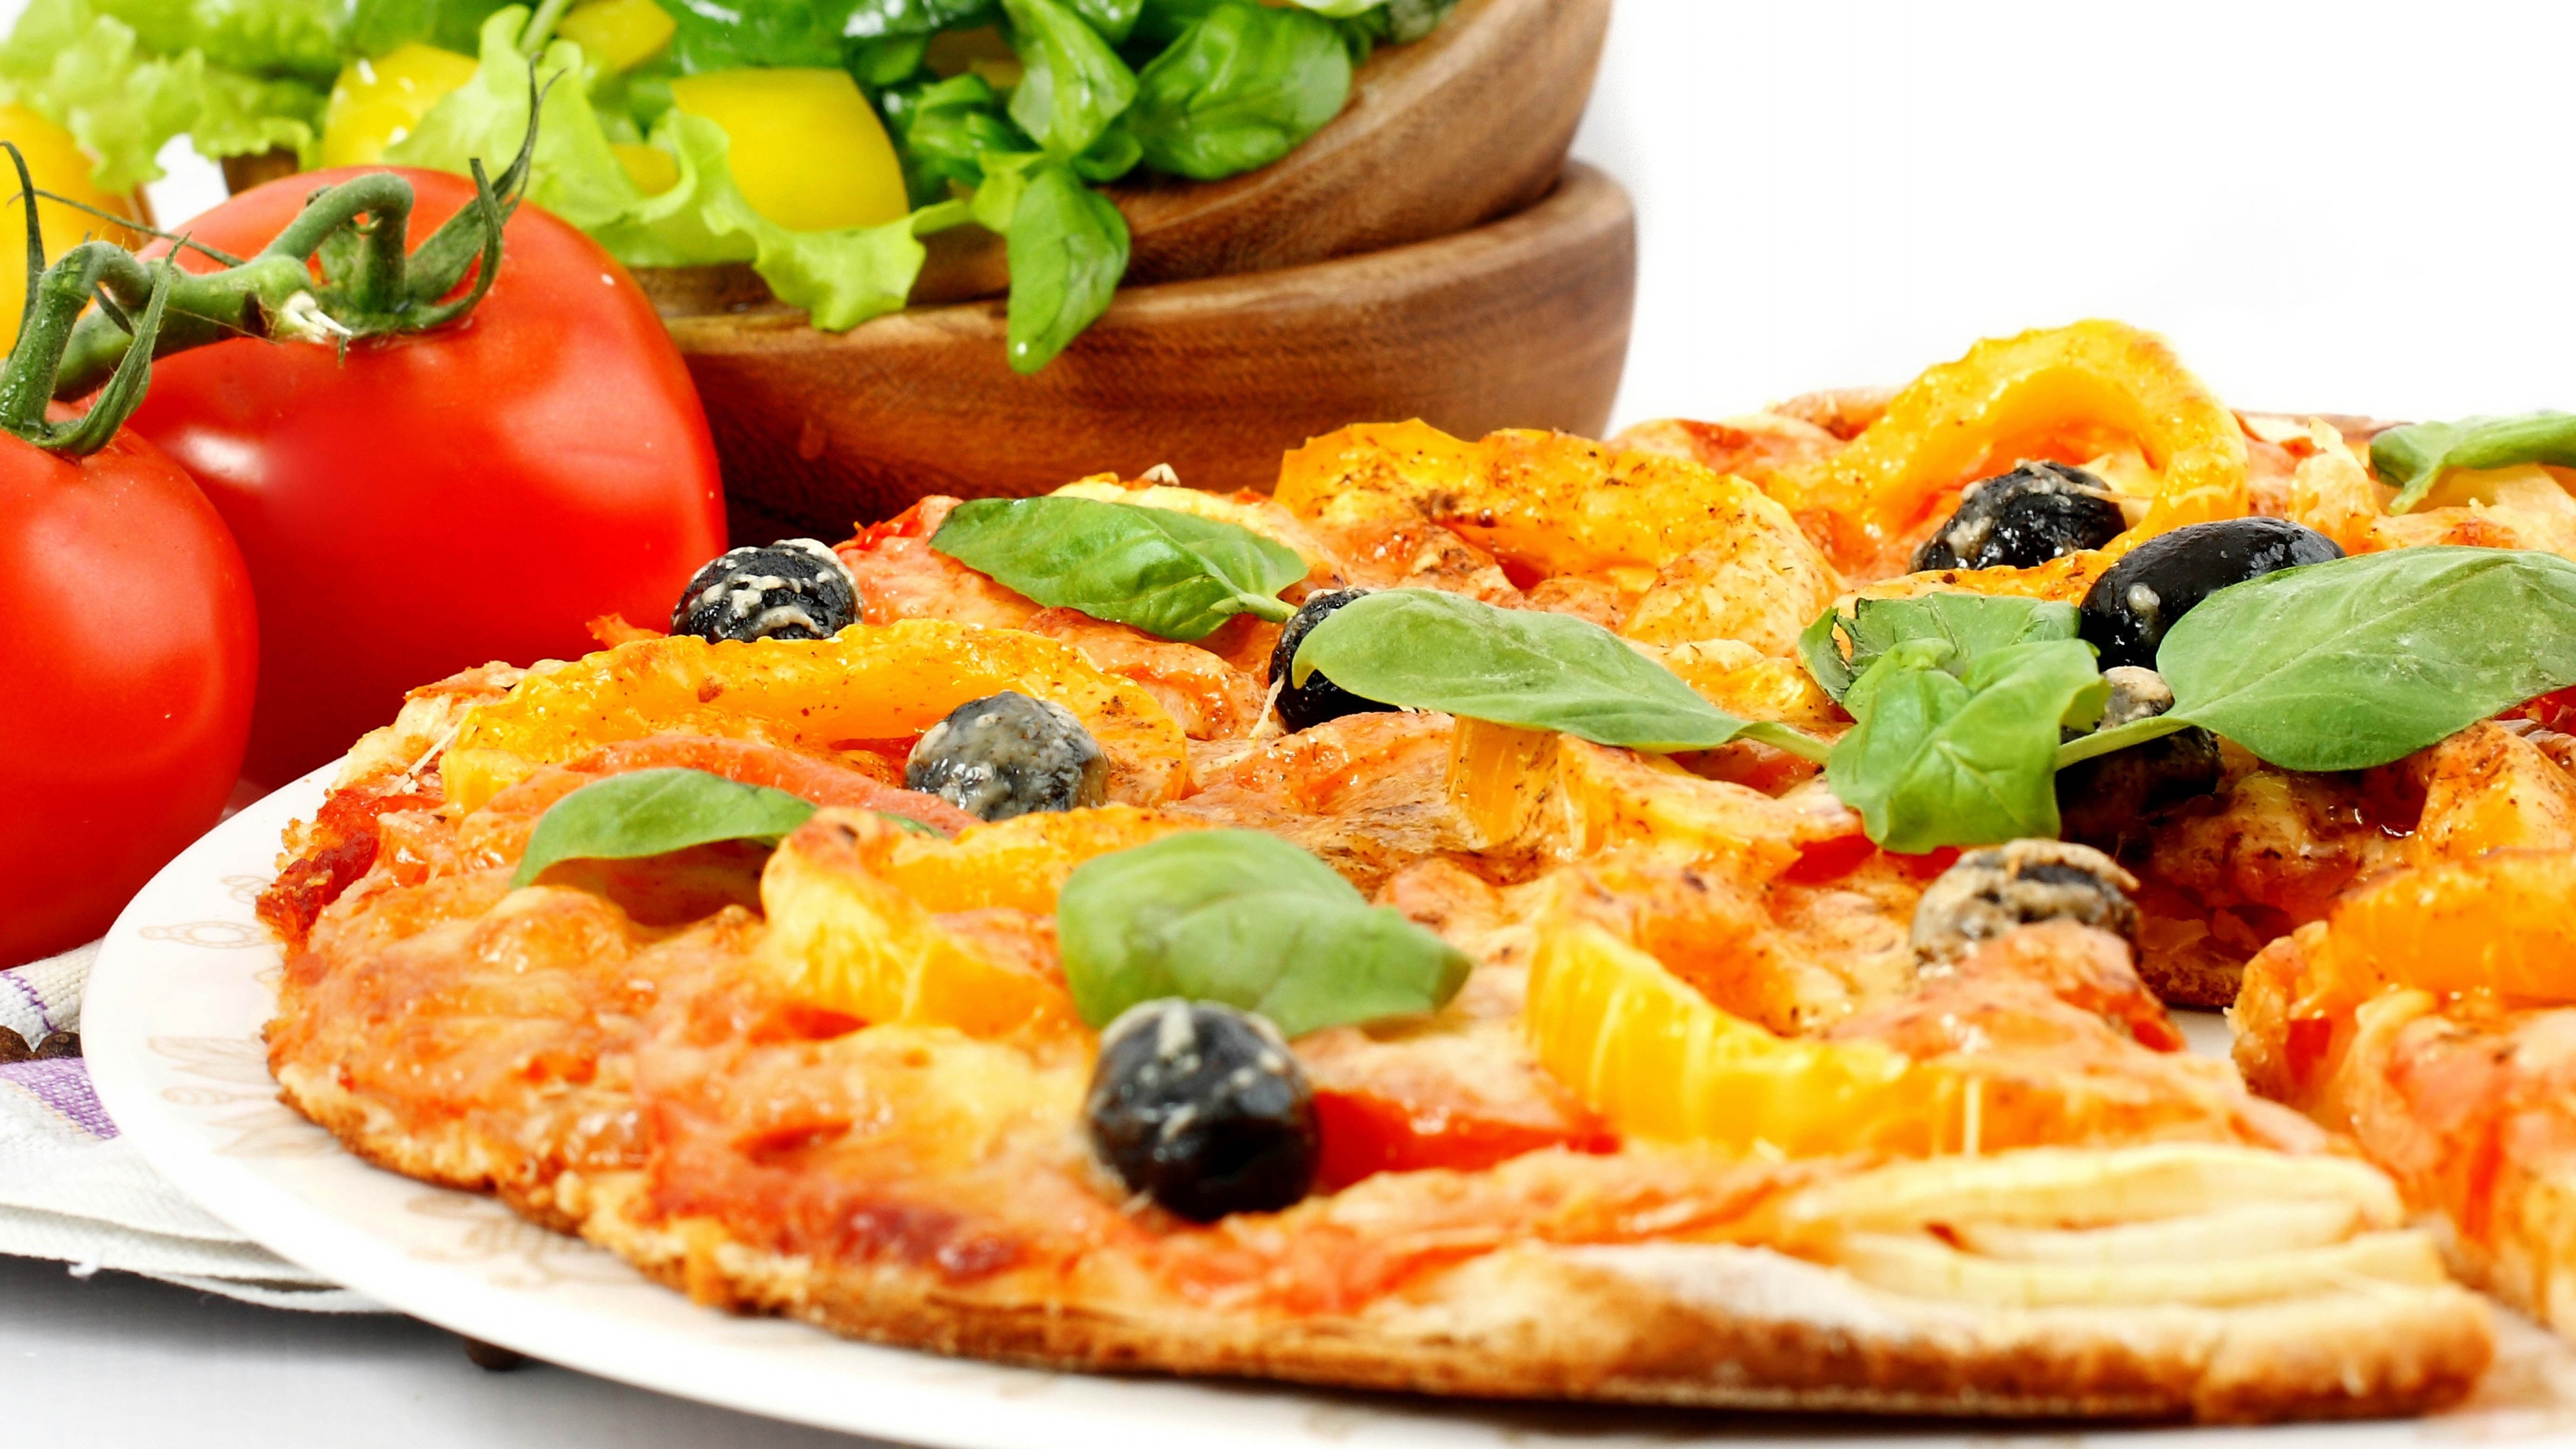 Pizza Food Tomatoes Olives Vegetables 3840x2160